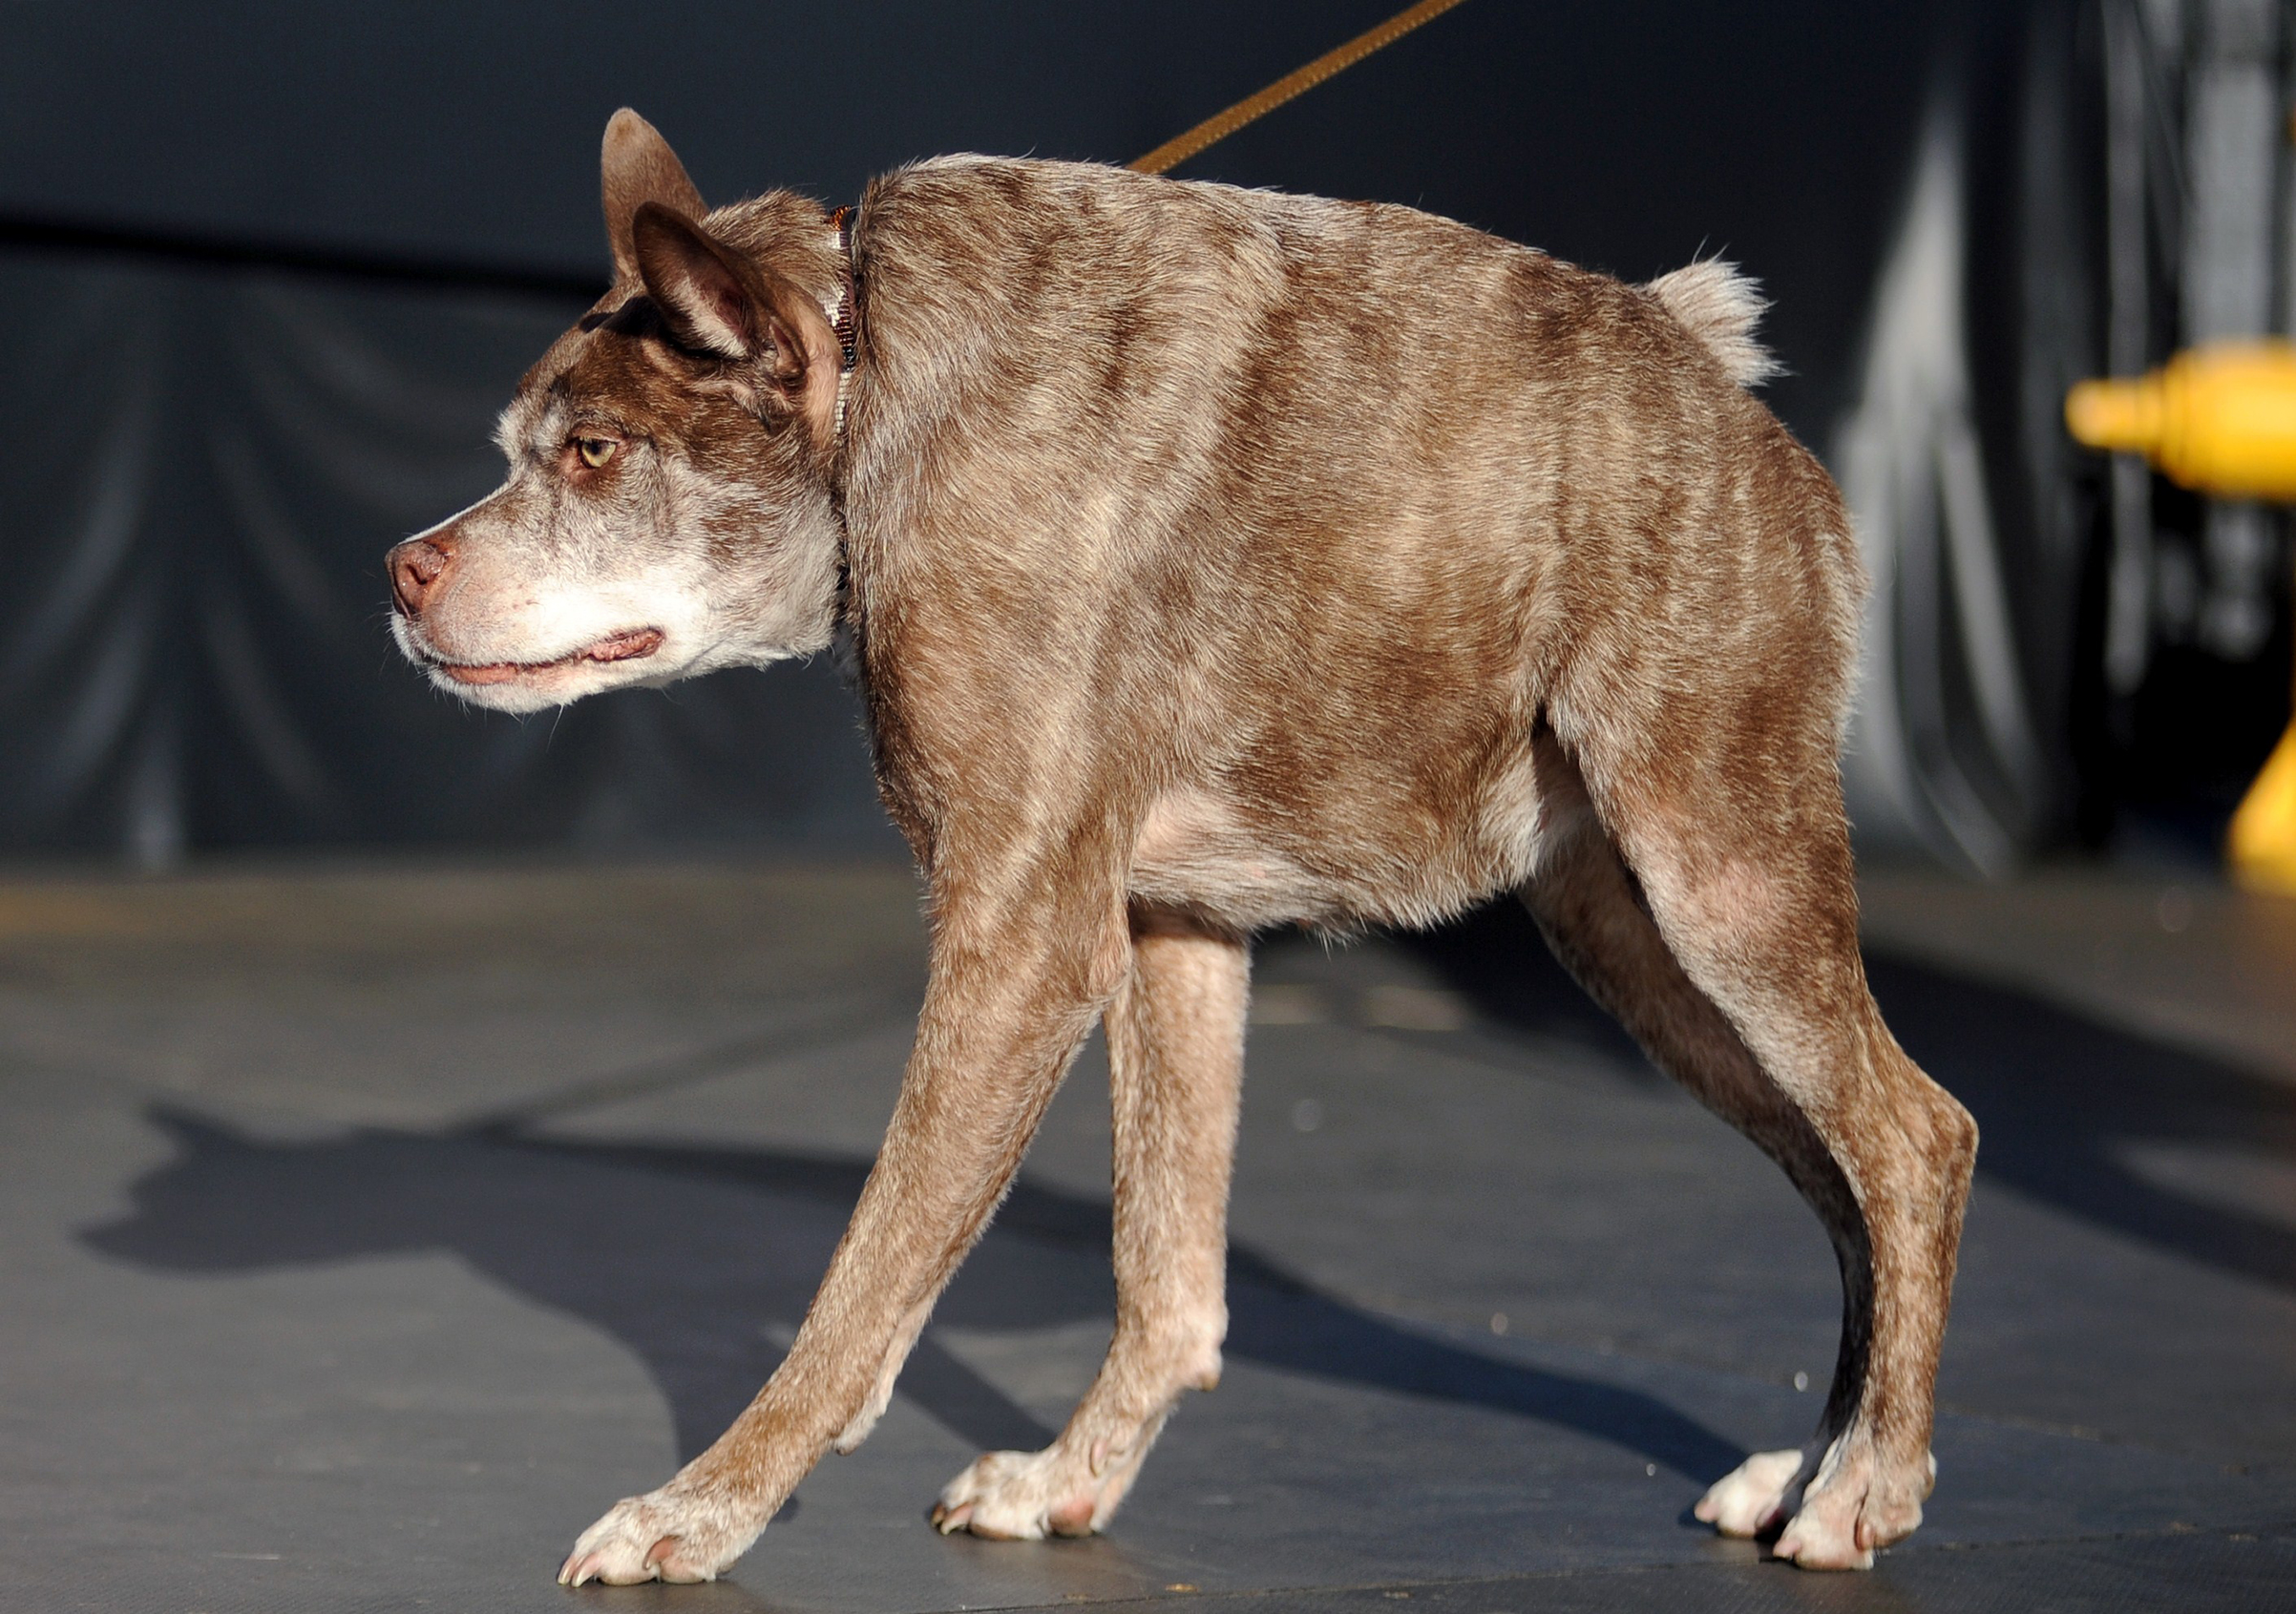 Quasi Modo, whom the owner claims has a back too short for its body, walks on the stage at The World's Ugliest Dog Competition in Petaluma, Calif. on June 20, 2014.